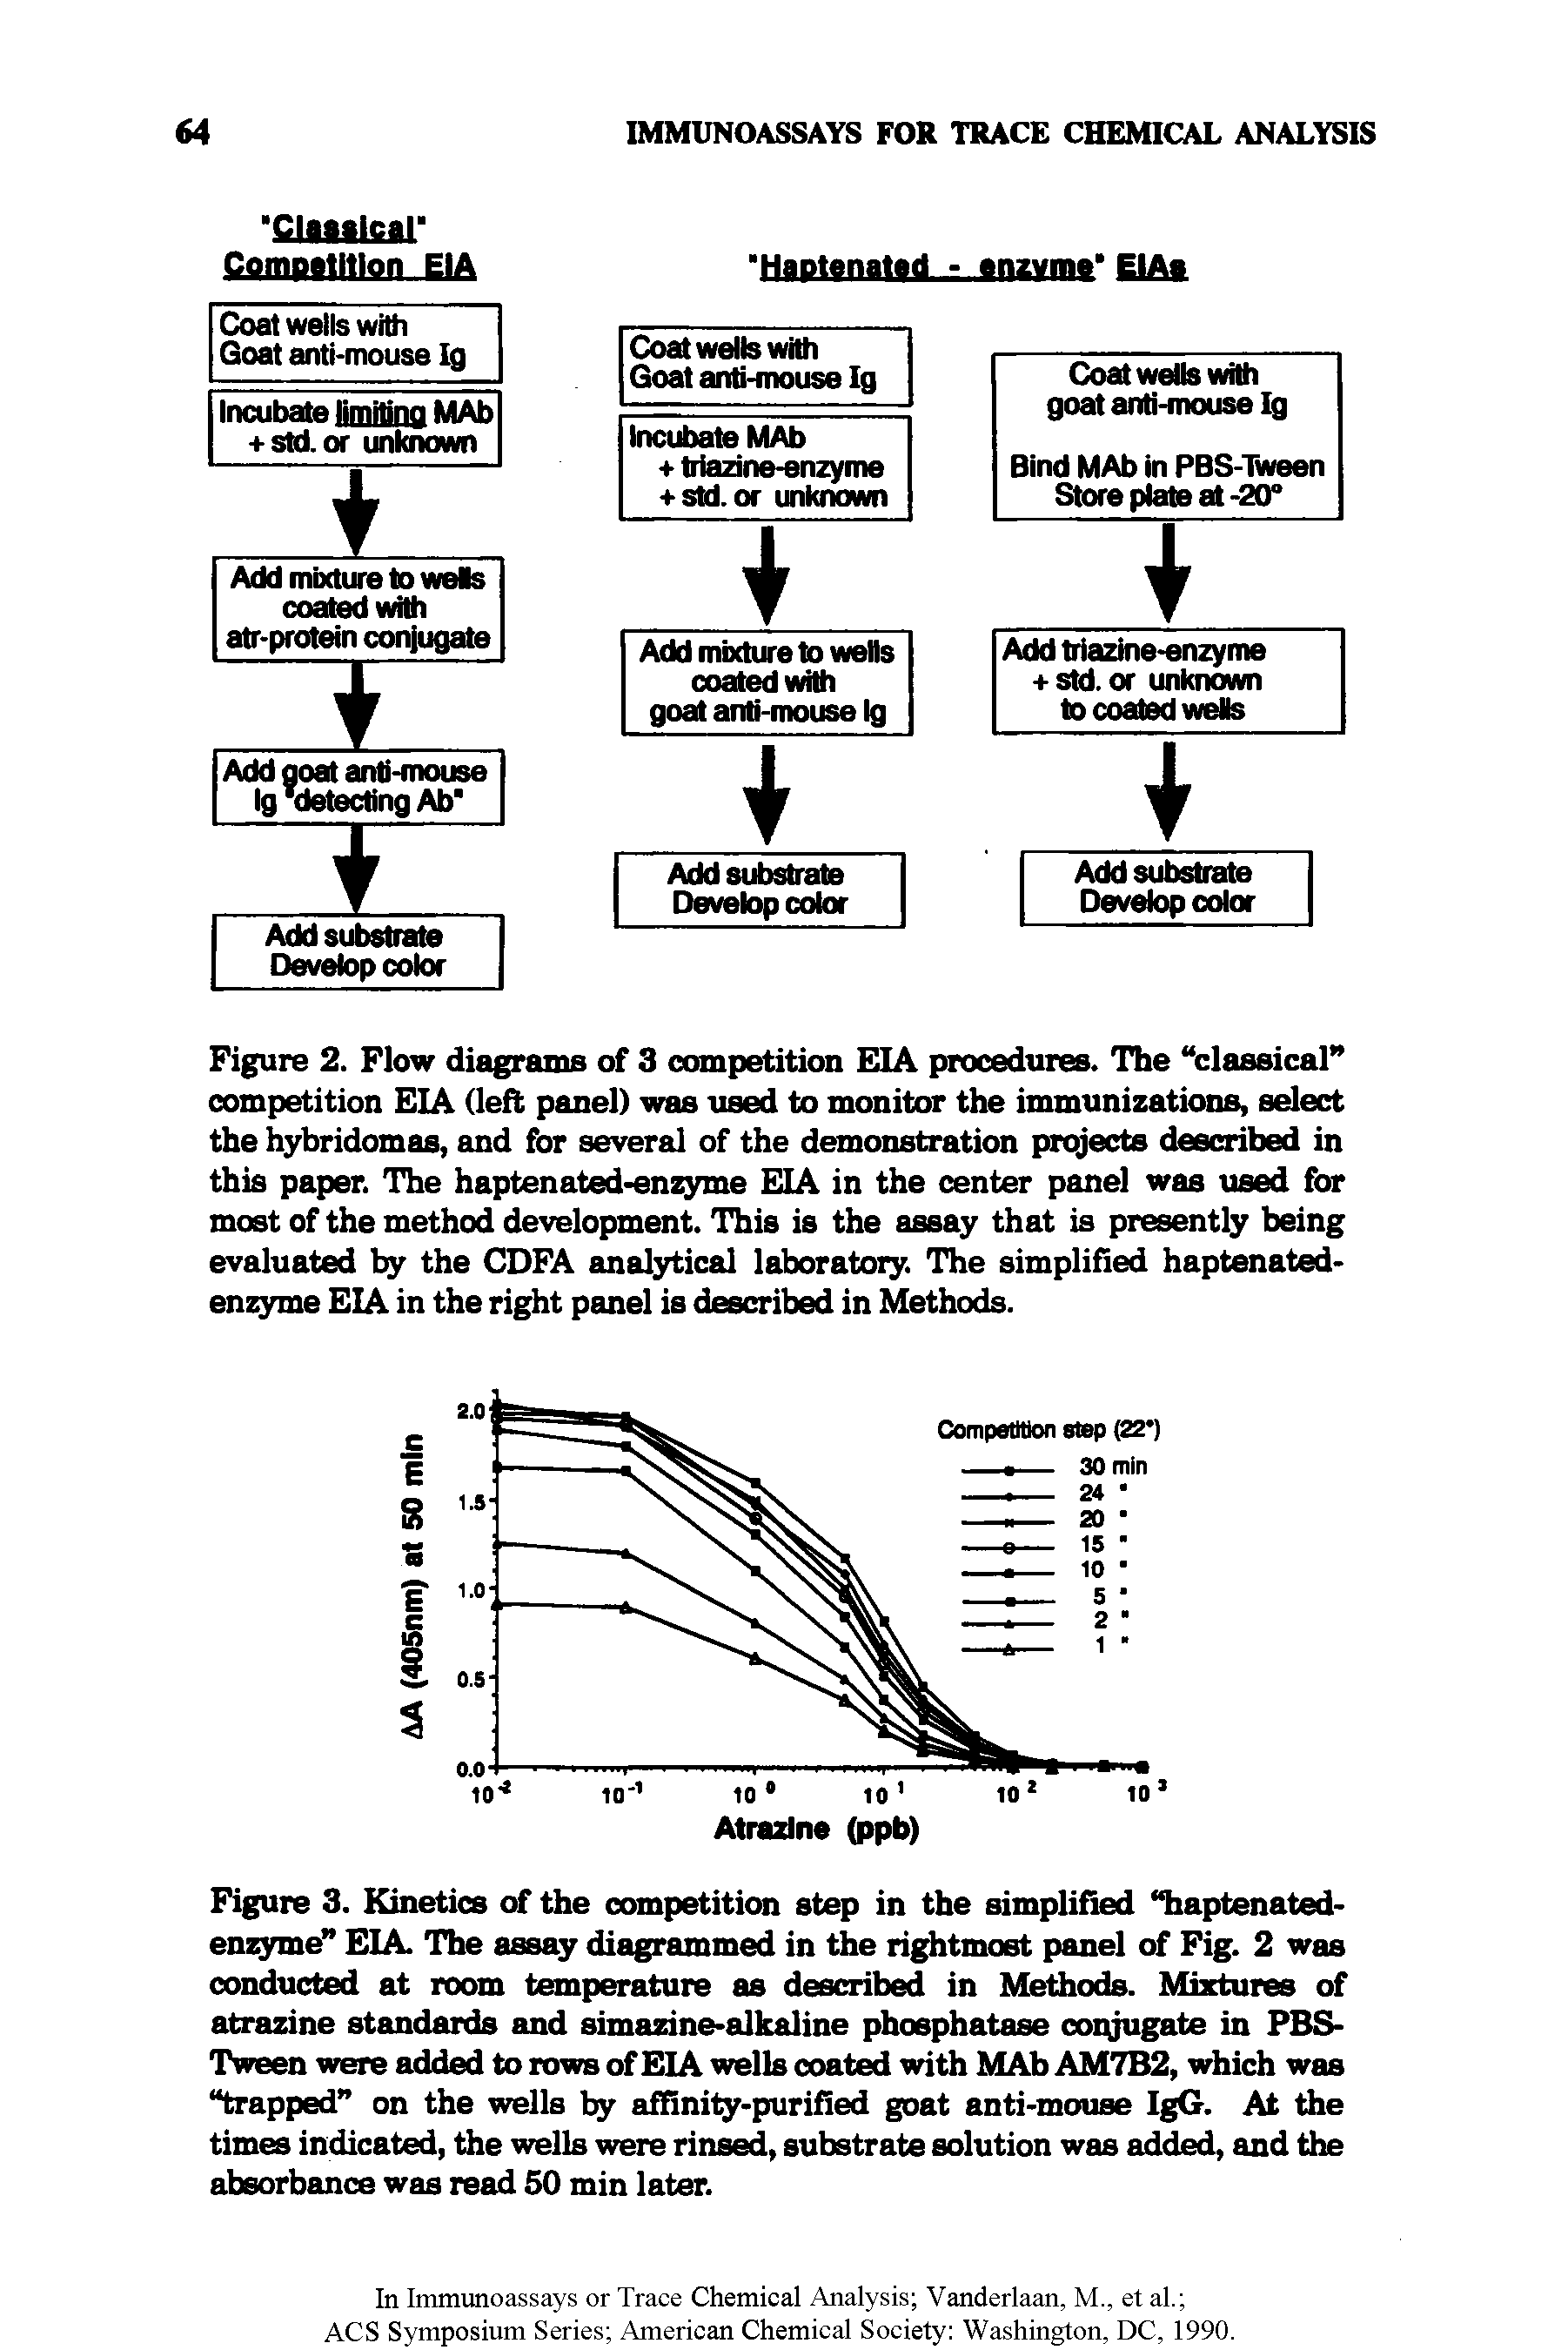 Figure 3. Kinetics of the competition step in the simplified liaptenated emyrne EIA. The assay diagrammed in the rightmost panel of Fig. 2 was conducted at room temperature as described in Methods. Mixtures of atrazine standards and simazine-alkaline phosphatase corrugate in PBS-Tween were added to rows of EIA wells coated with MAh AM7B2, vdiich was Tapped on the wells by affinity-purified goat anti-mouse IgG. At the times indicated, the wells were rinsed, substrate solution was added, and the absorbance was read 50 min later.